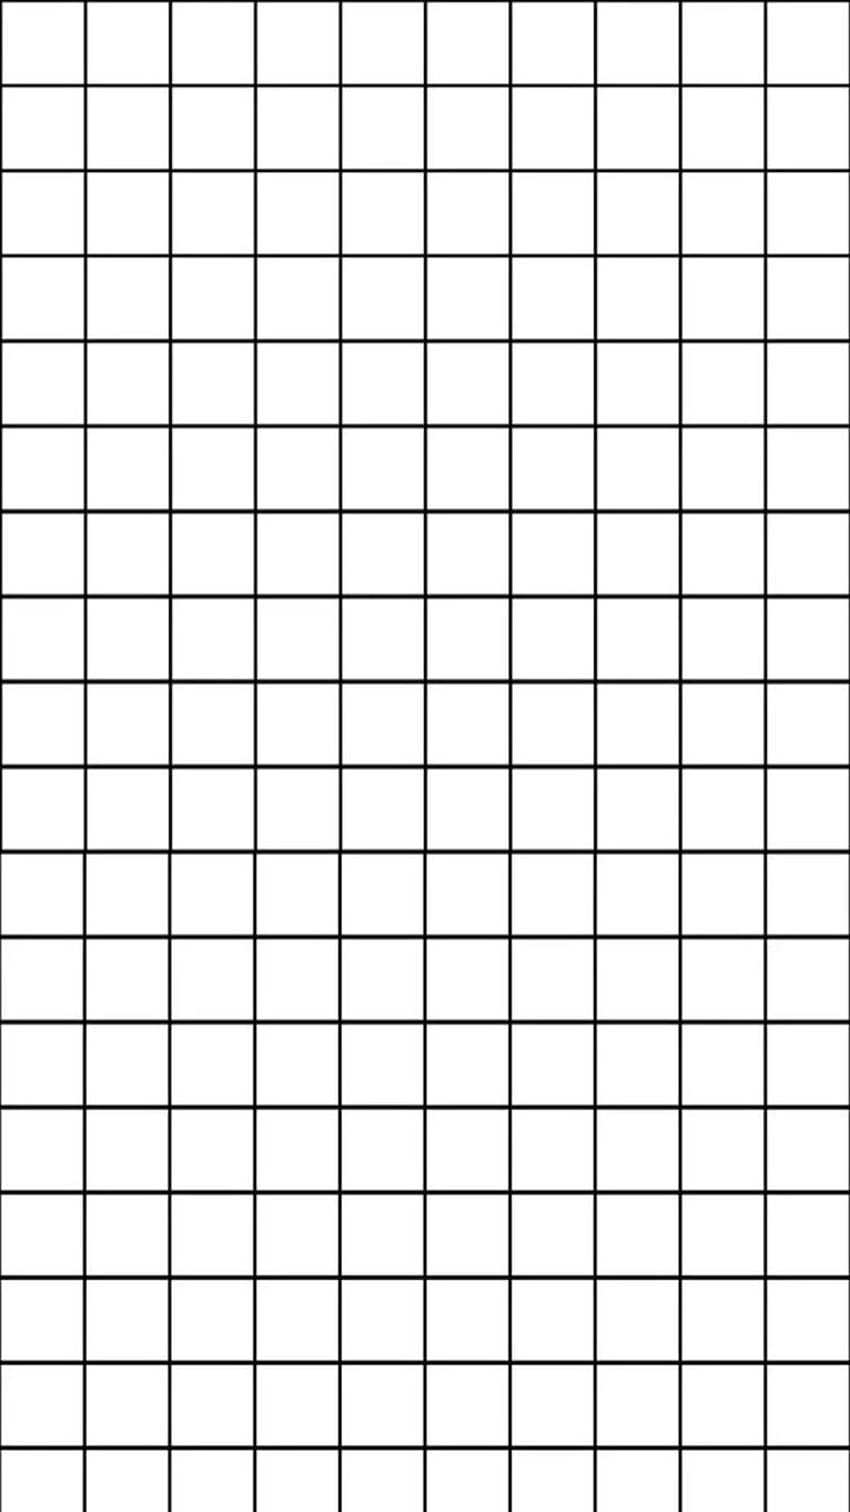 A blank grid paper with squares - Grid